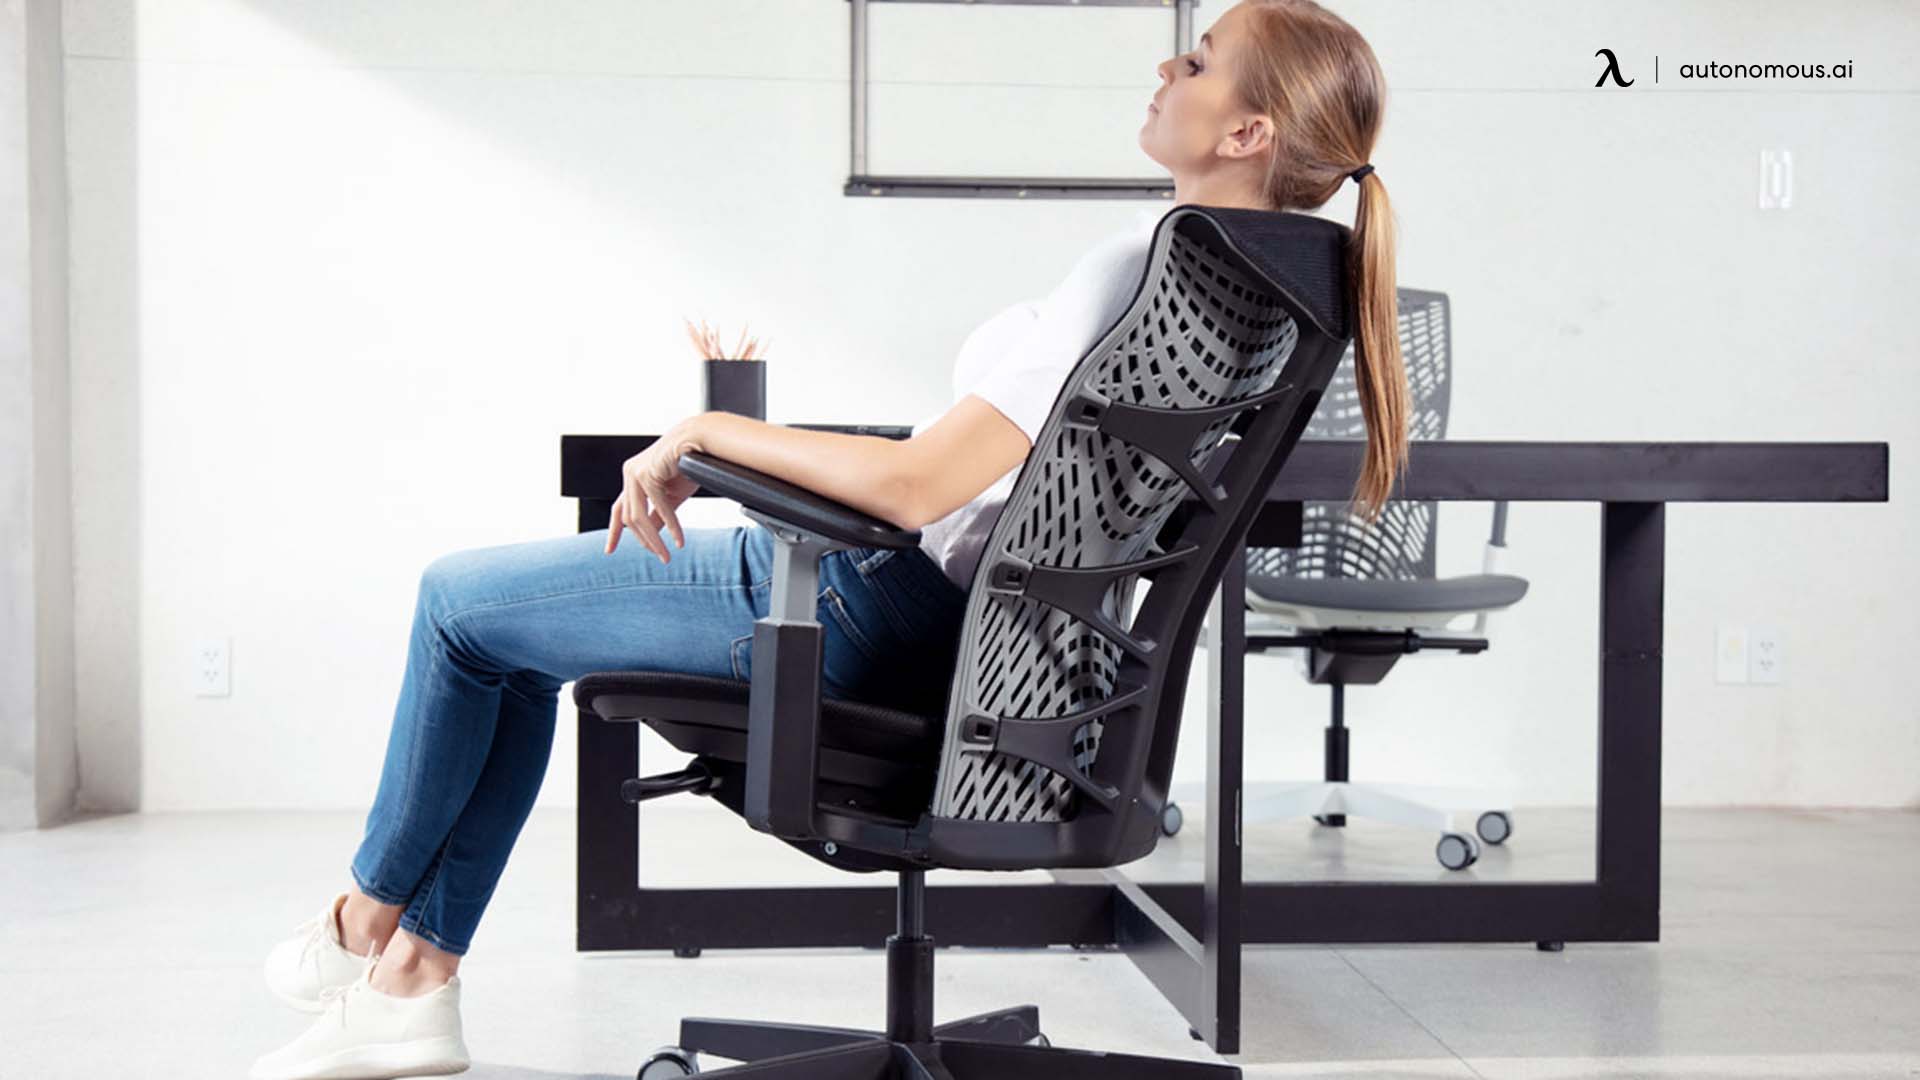 Is an Expensive Chair Worth Your Money?